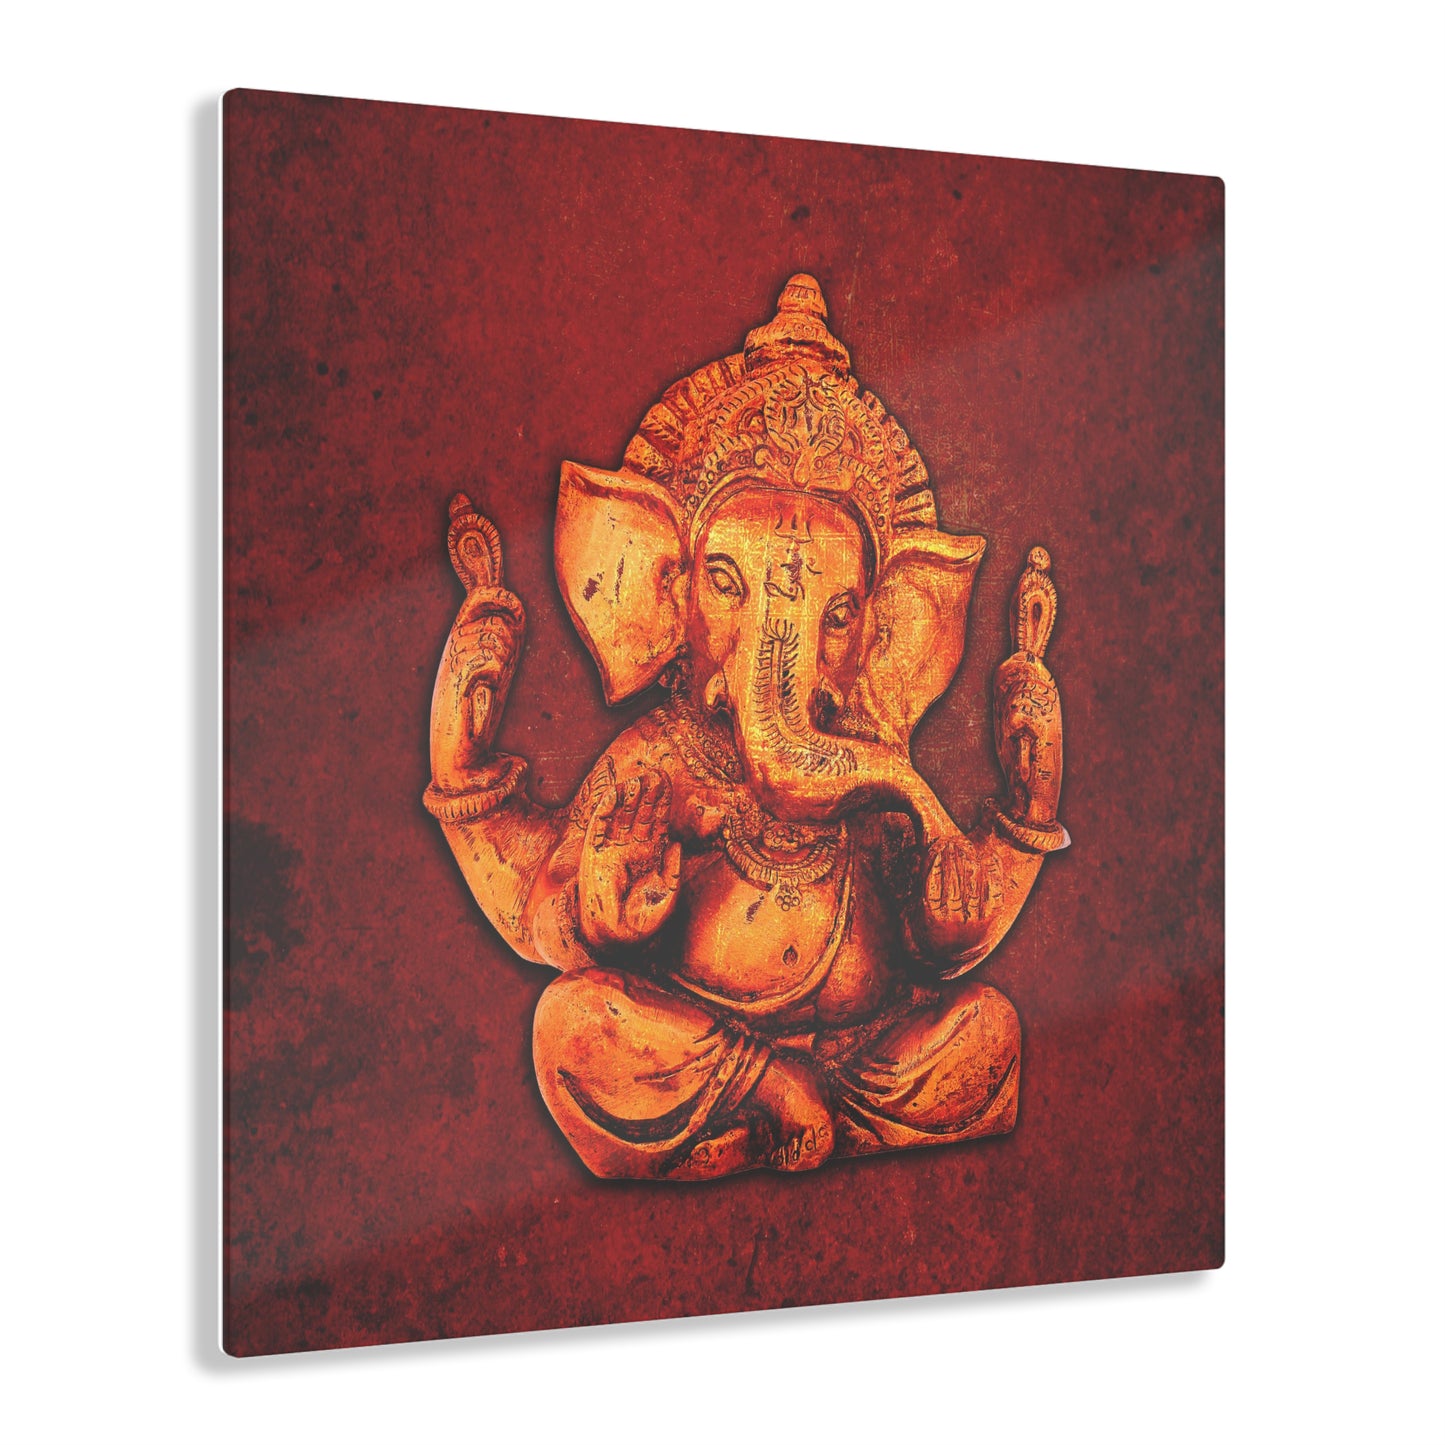 Golden Ganesha on a Distressed Lava Red Background Printed on Crystal Clear Acrylic Panel 